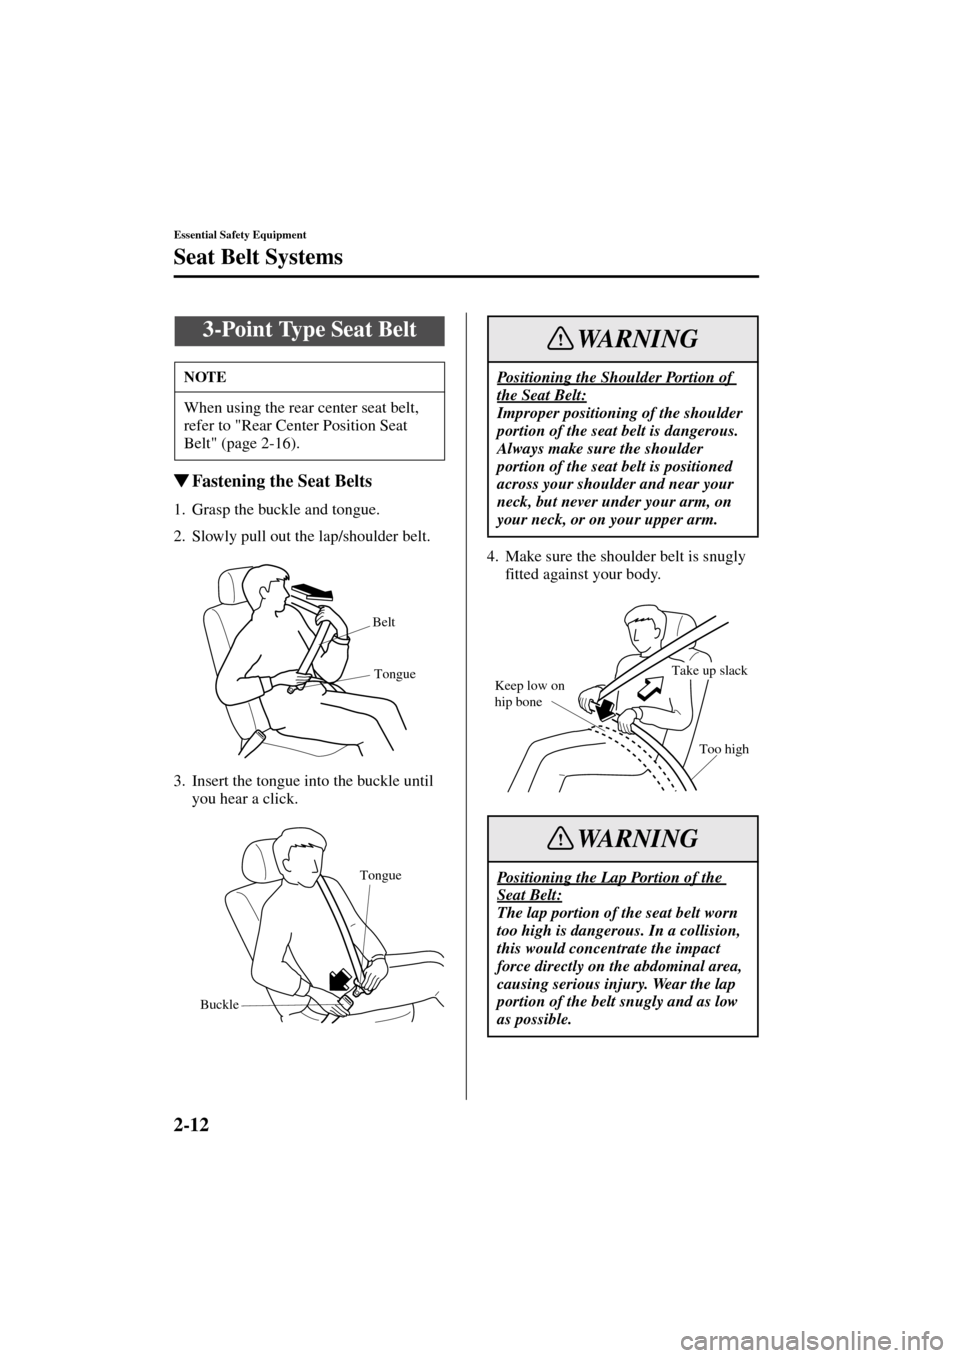 MAZDA MODEL 3 HATCHBACK 2004   (in English) Owners Guide 2-12
Essential Safety Equipment
Seat Belt Systems
Form No. 8S18-EA-03I
Fastening the Seat Belts
1. Grasp the buckle and tongue.
2. Slowly pull out the lap/shoulder belt.
3. Insert the tongue into the